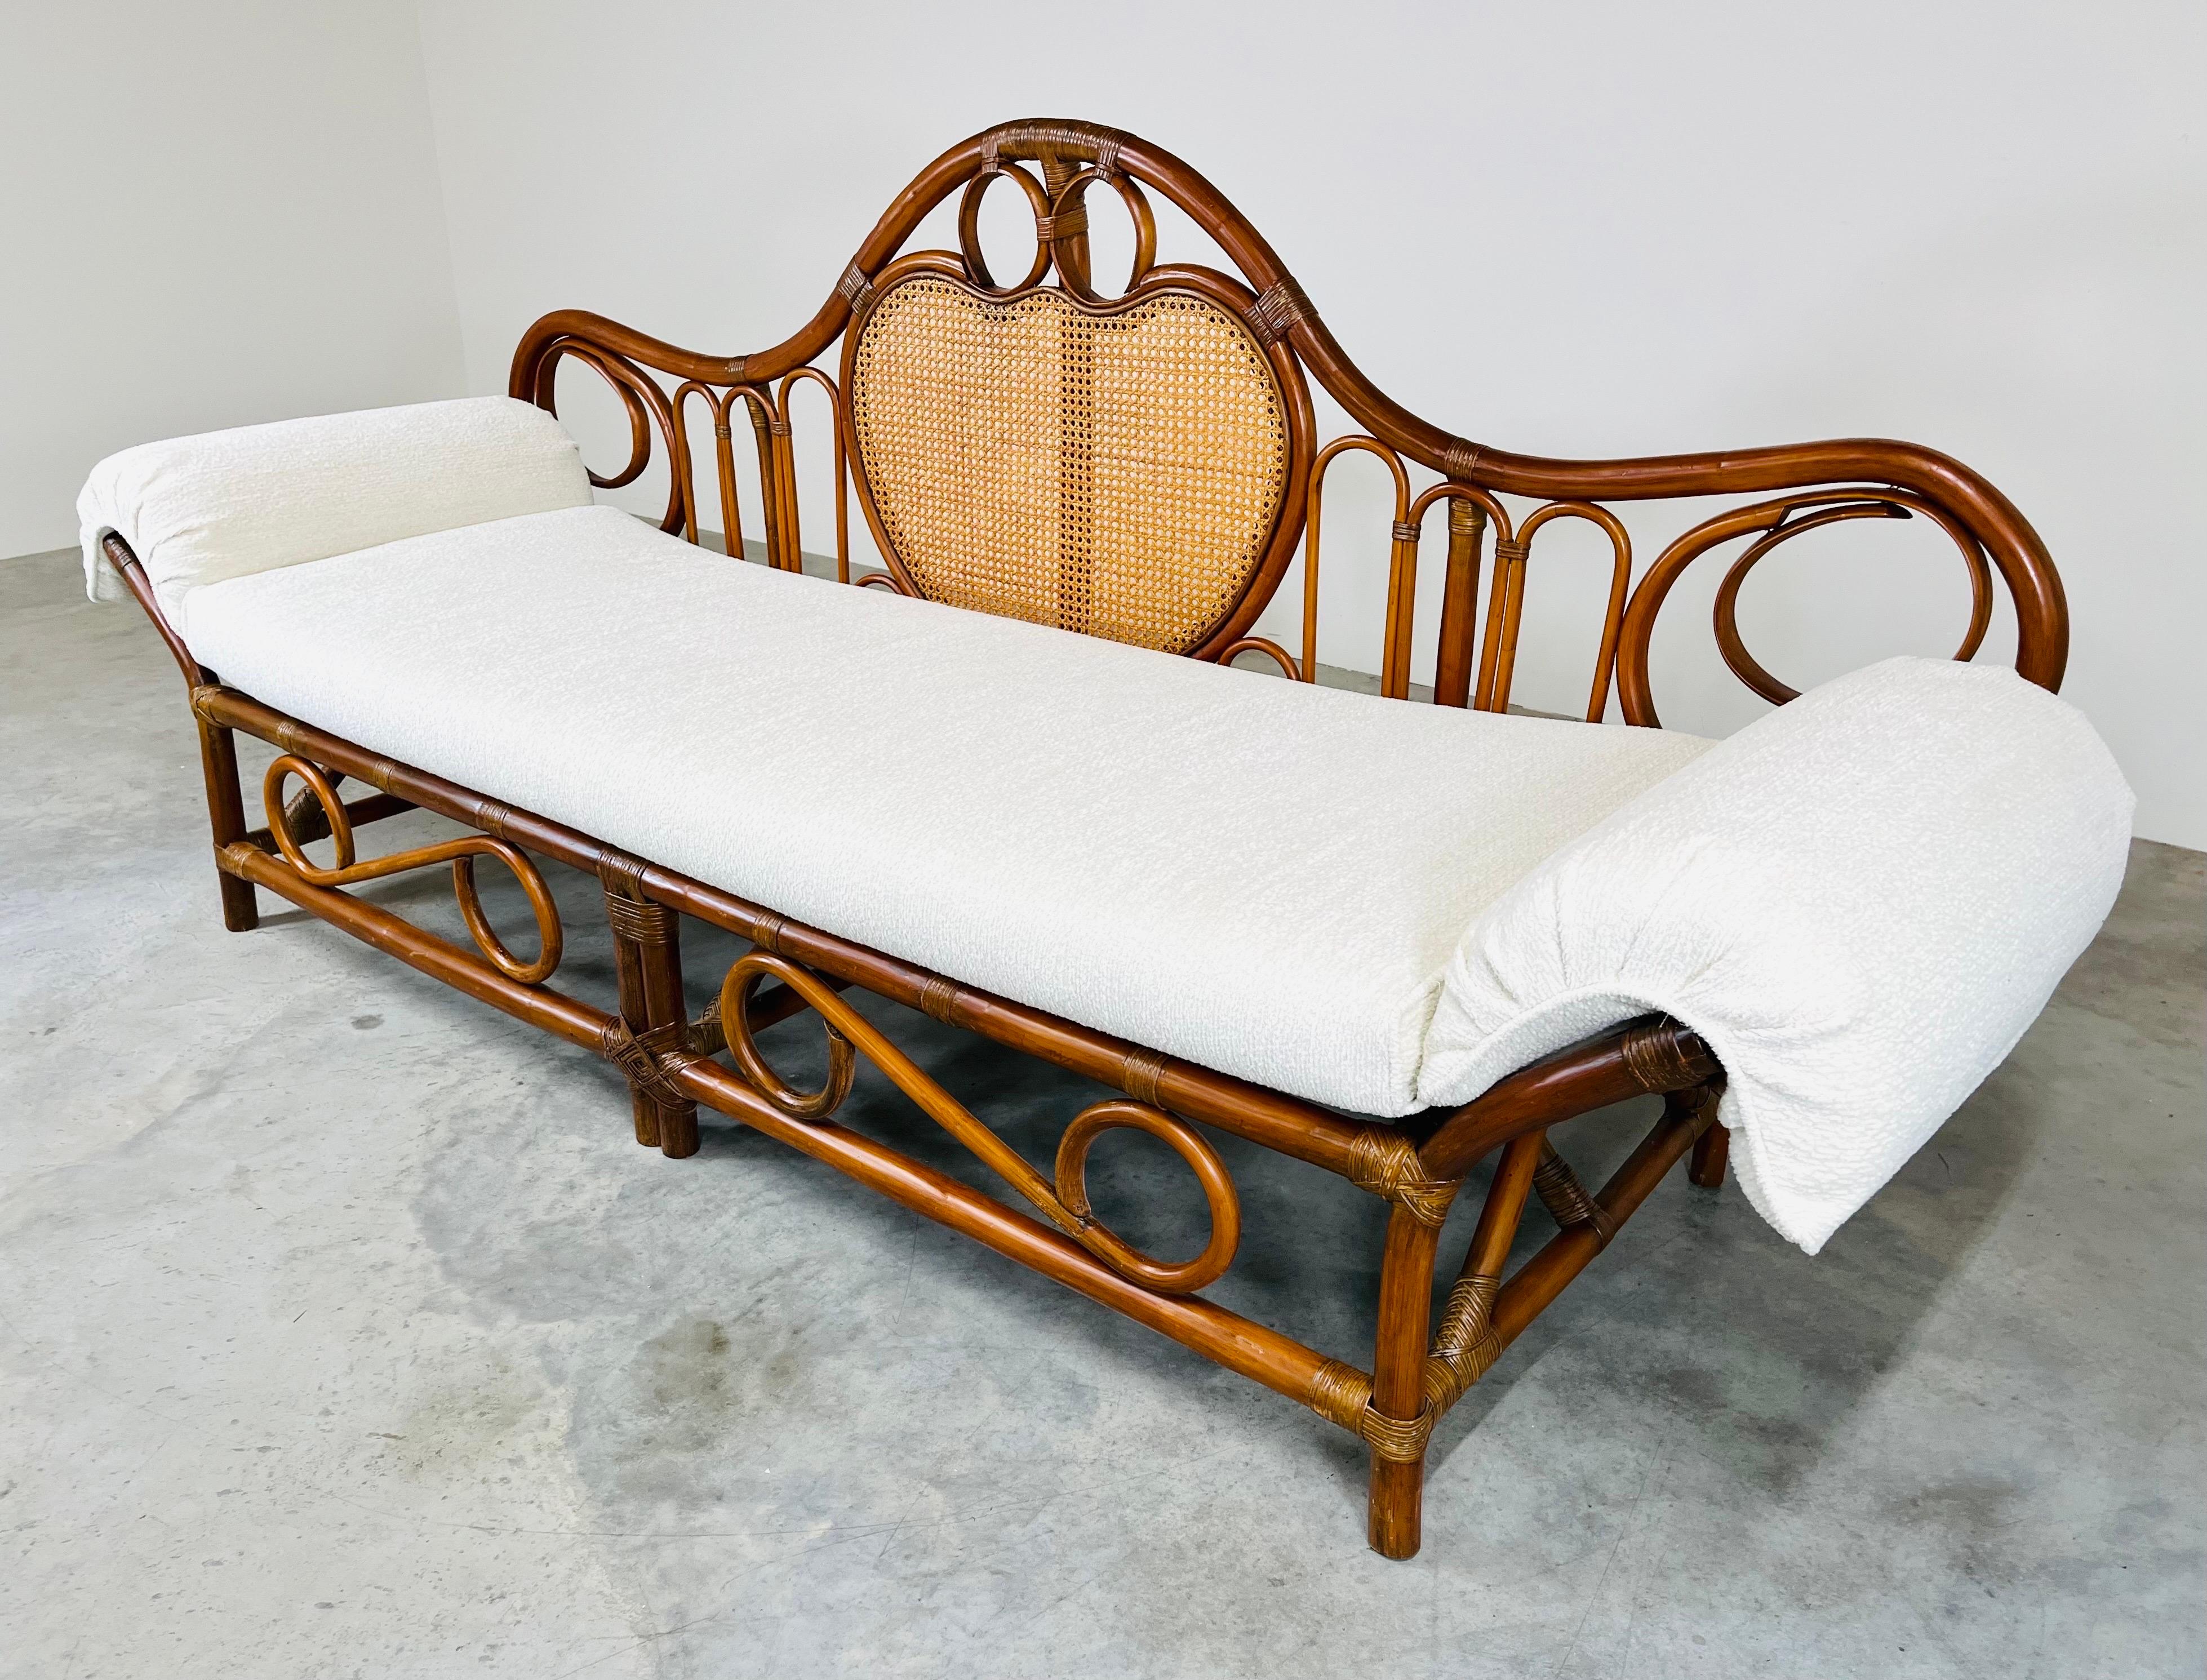 Sculptural Bamboo Daybed Chaise
Attributed to Tommi Parzinger
Extremely stylish bamboo daybed, chaise lounge attributed to Tommi Parzinger for Willow Reed Furniture. The sofa chaise comes with the cushion shown which is formed to curl over the